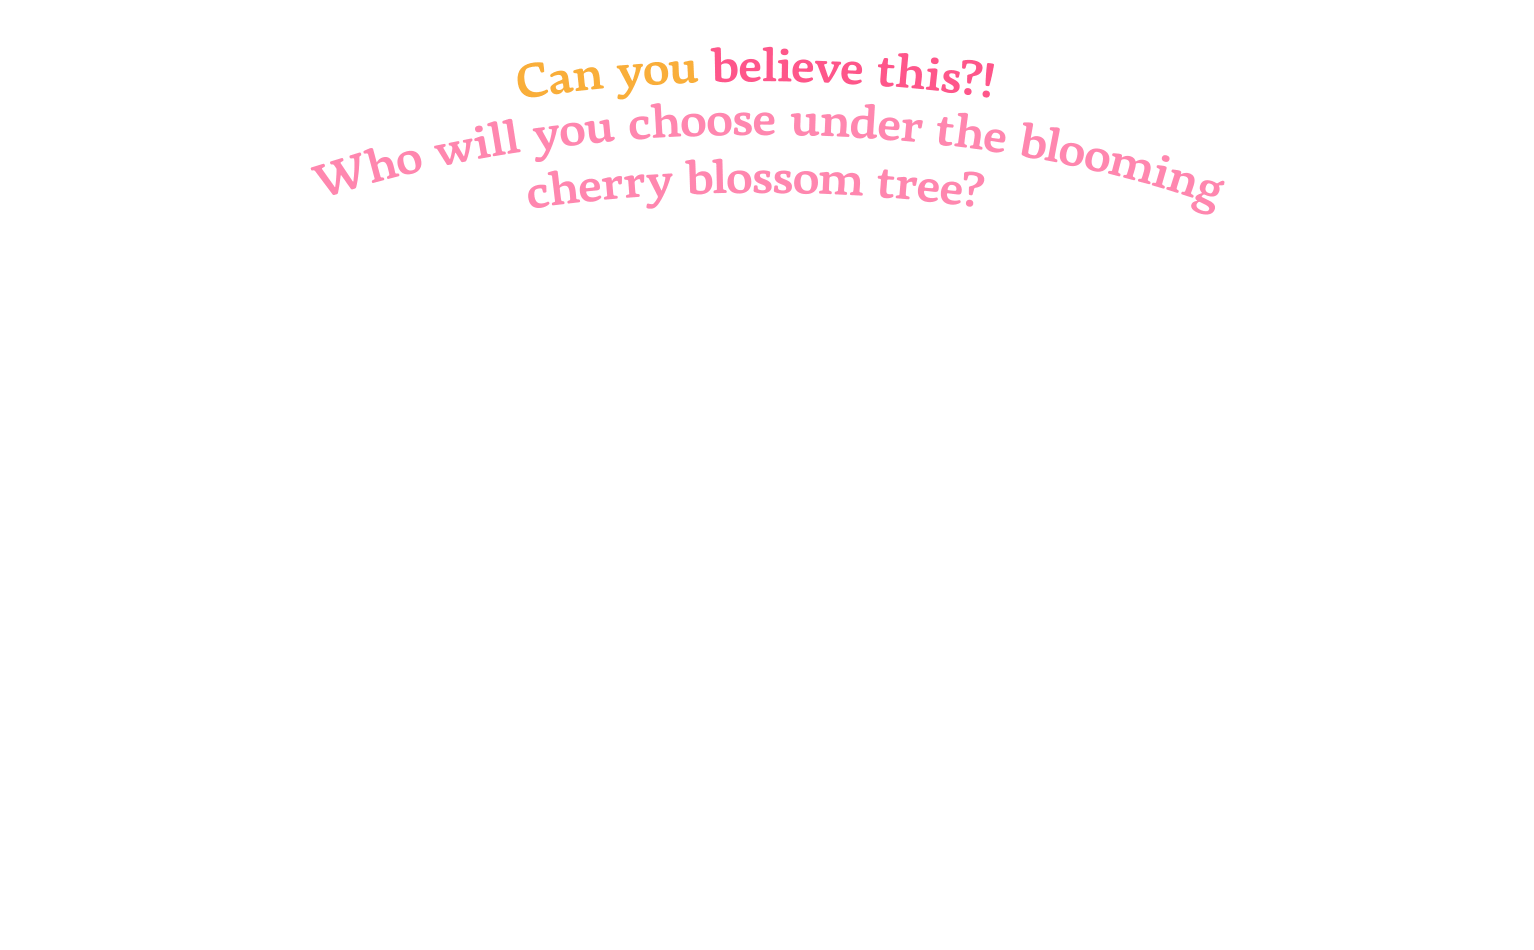 Can you believe this?! Who will you choose under the blooming cherry blossom tree?